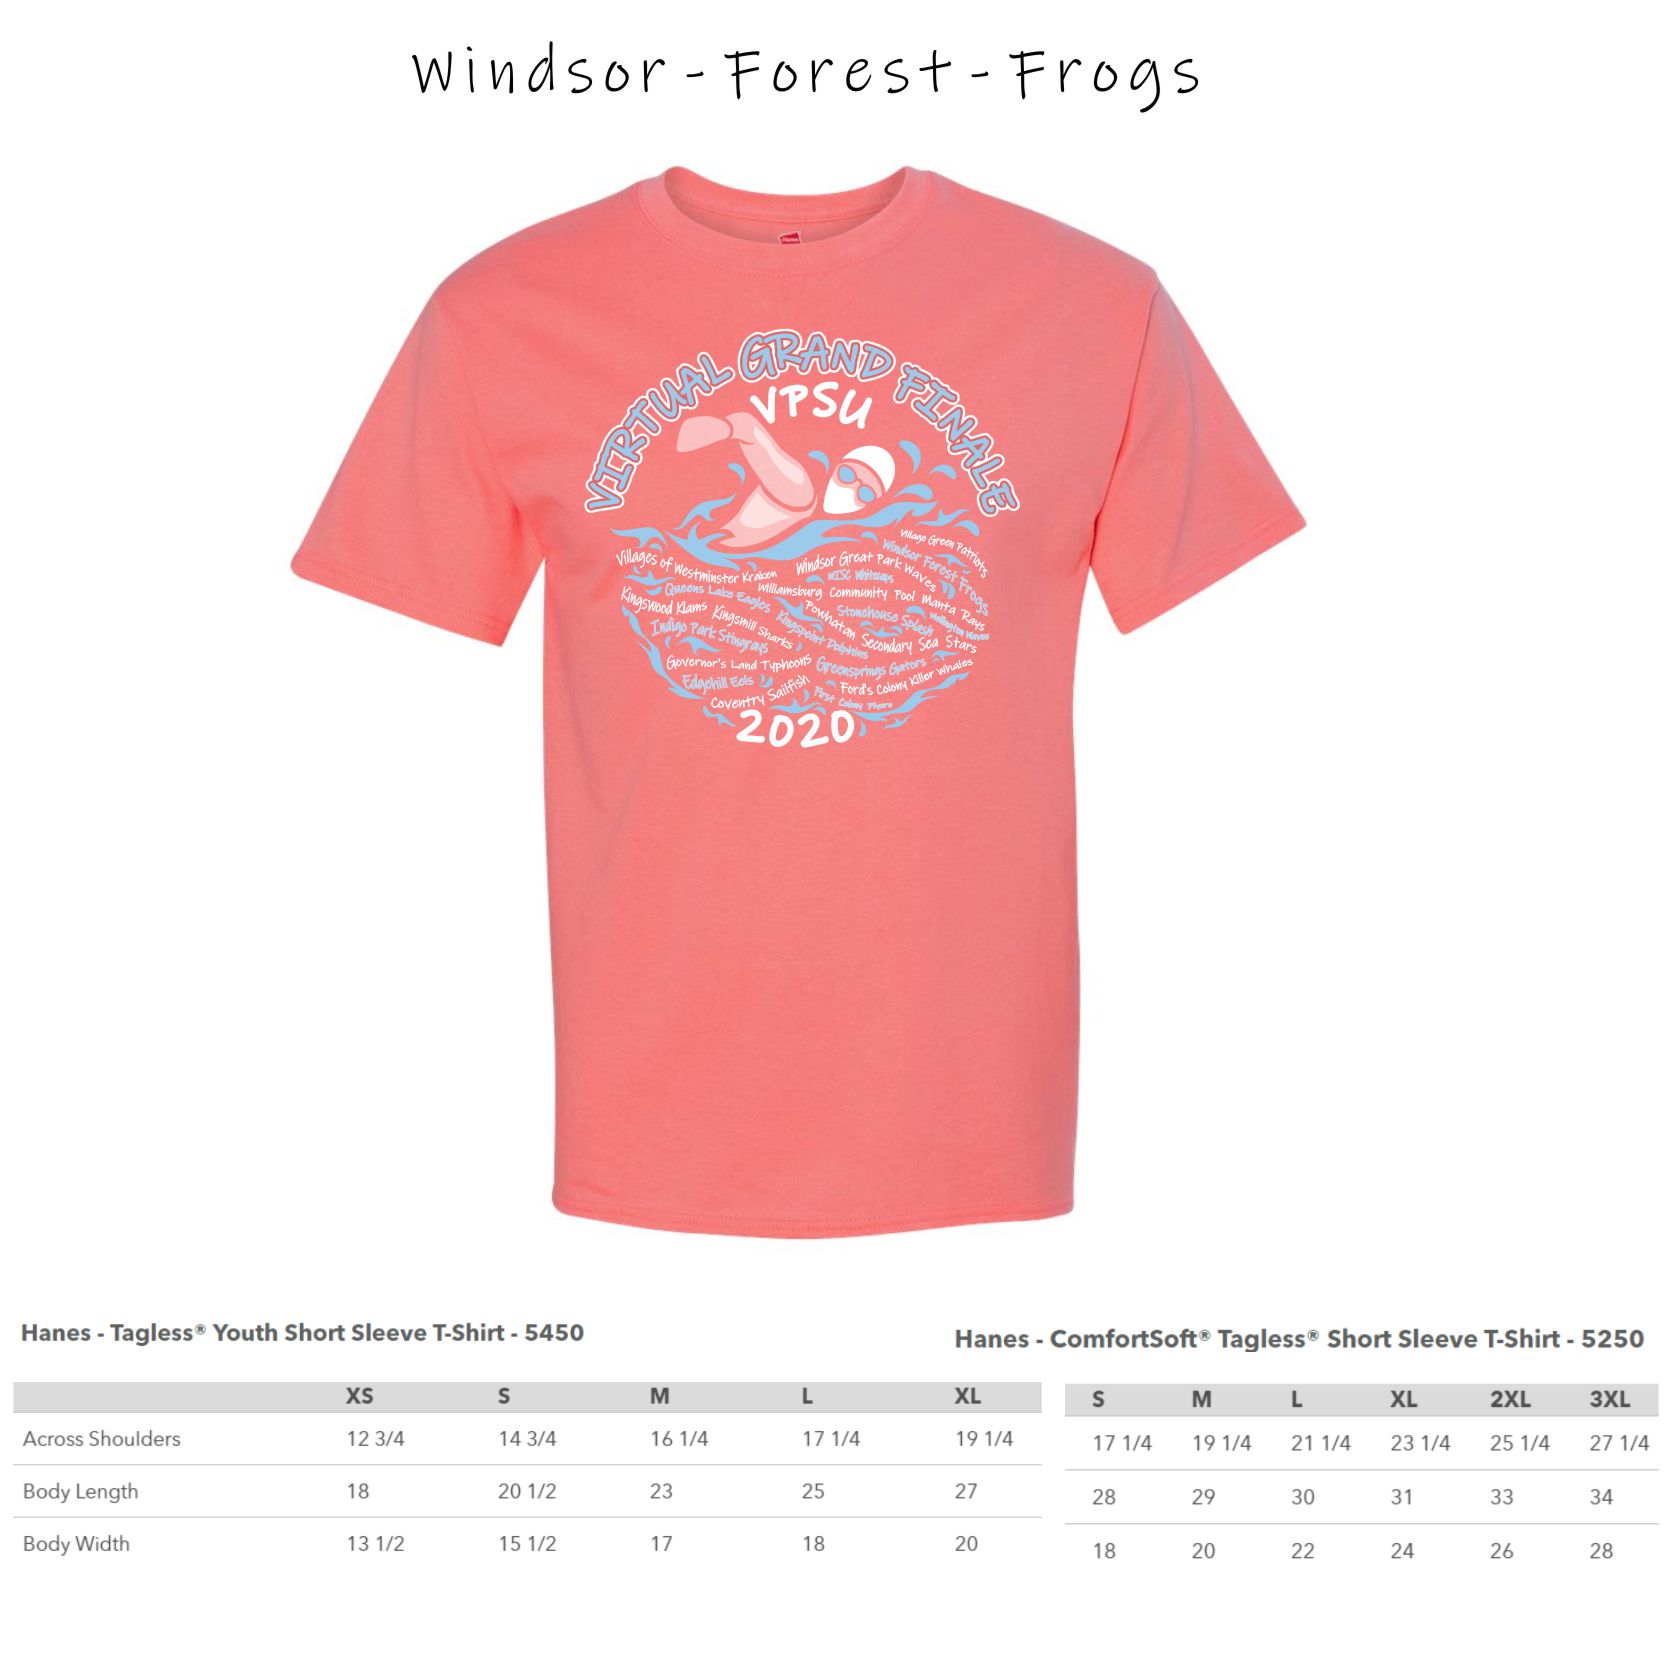 1 - Windsor Forest Frogs